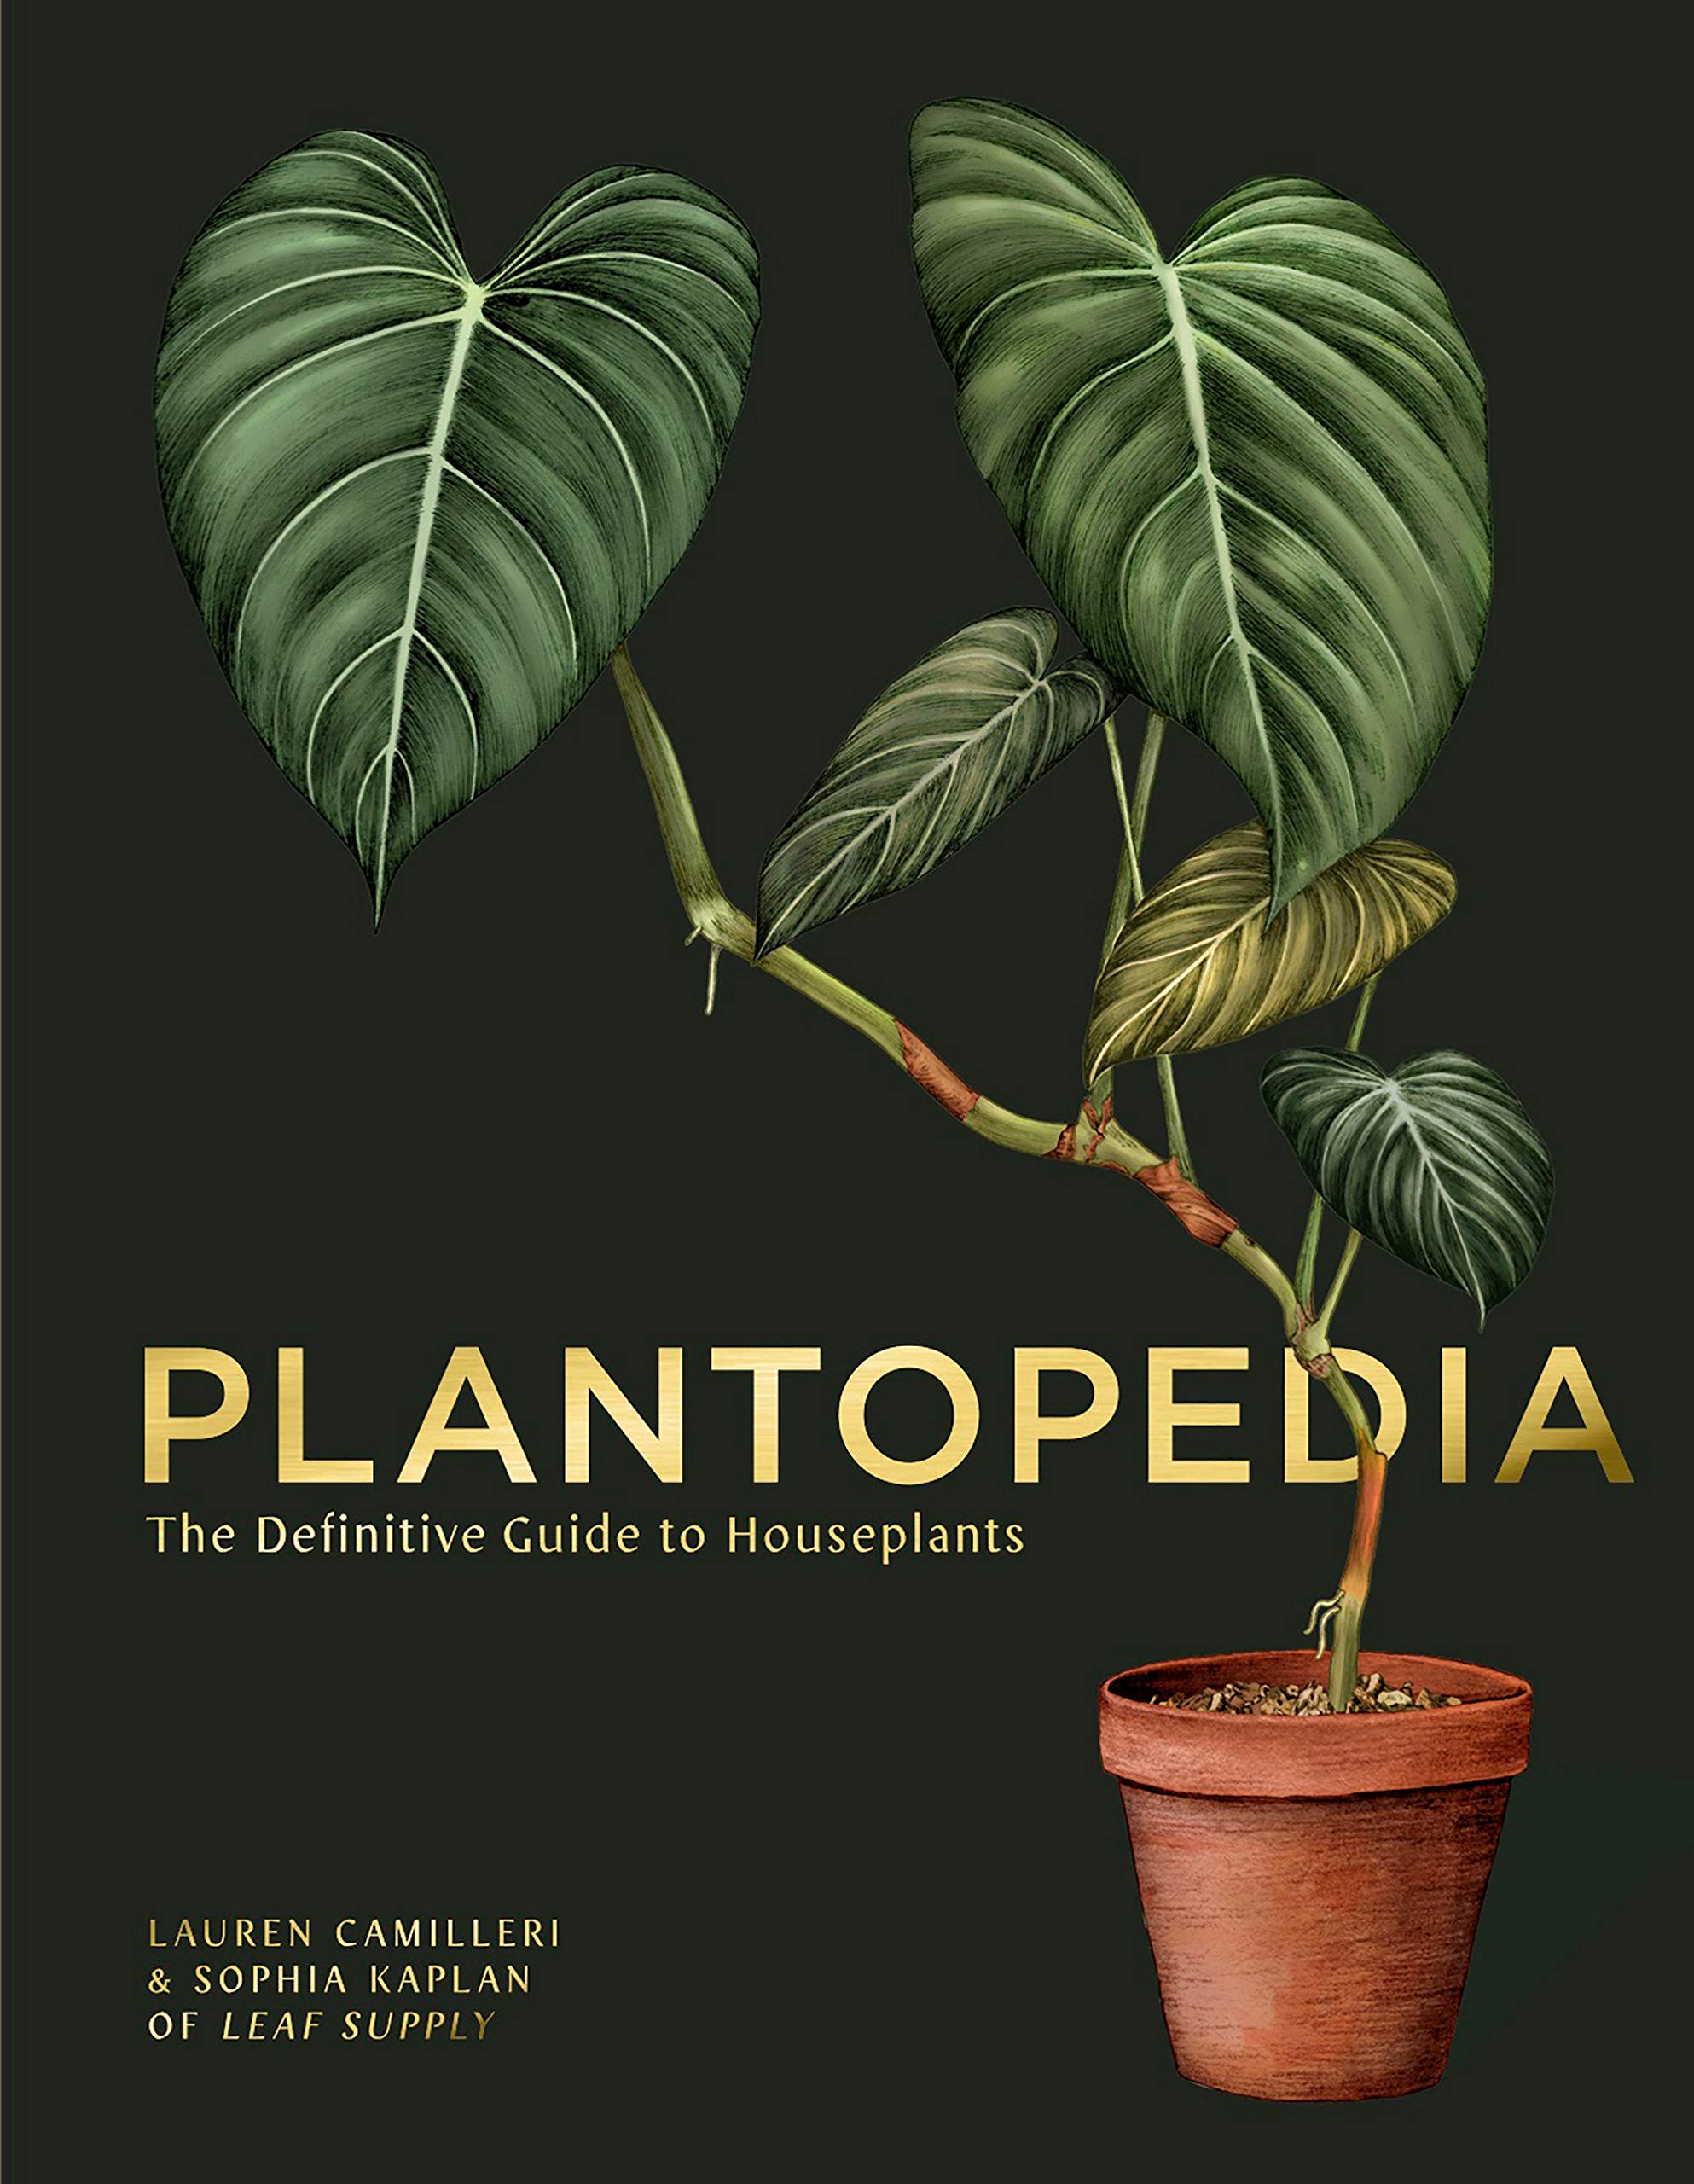 Plantopedia: The Definitive Guide to Houseplants (Hardcover)